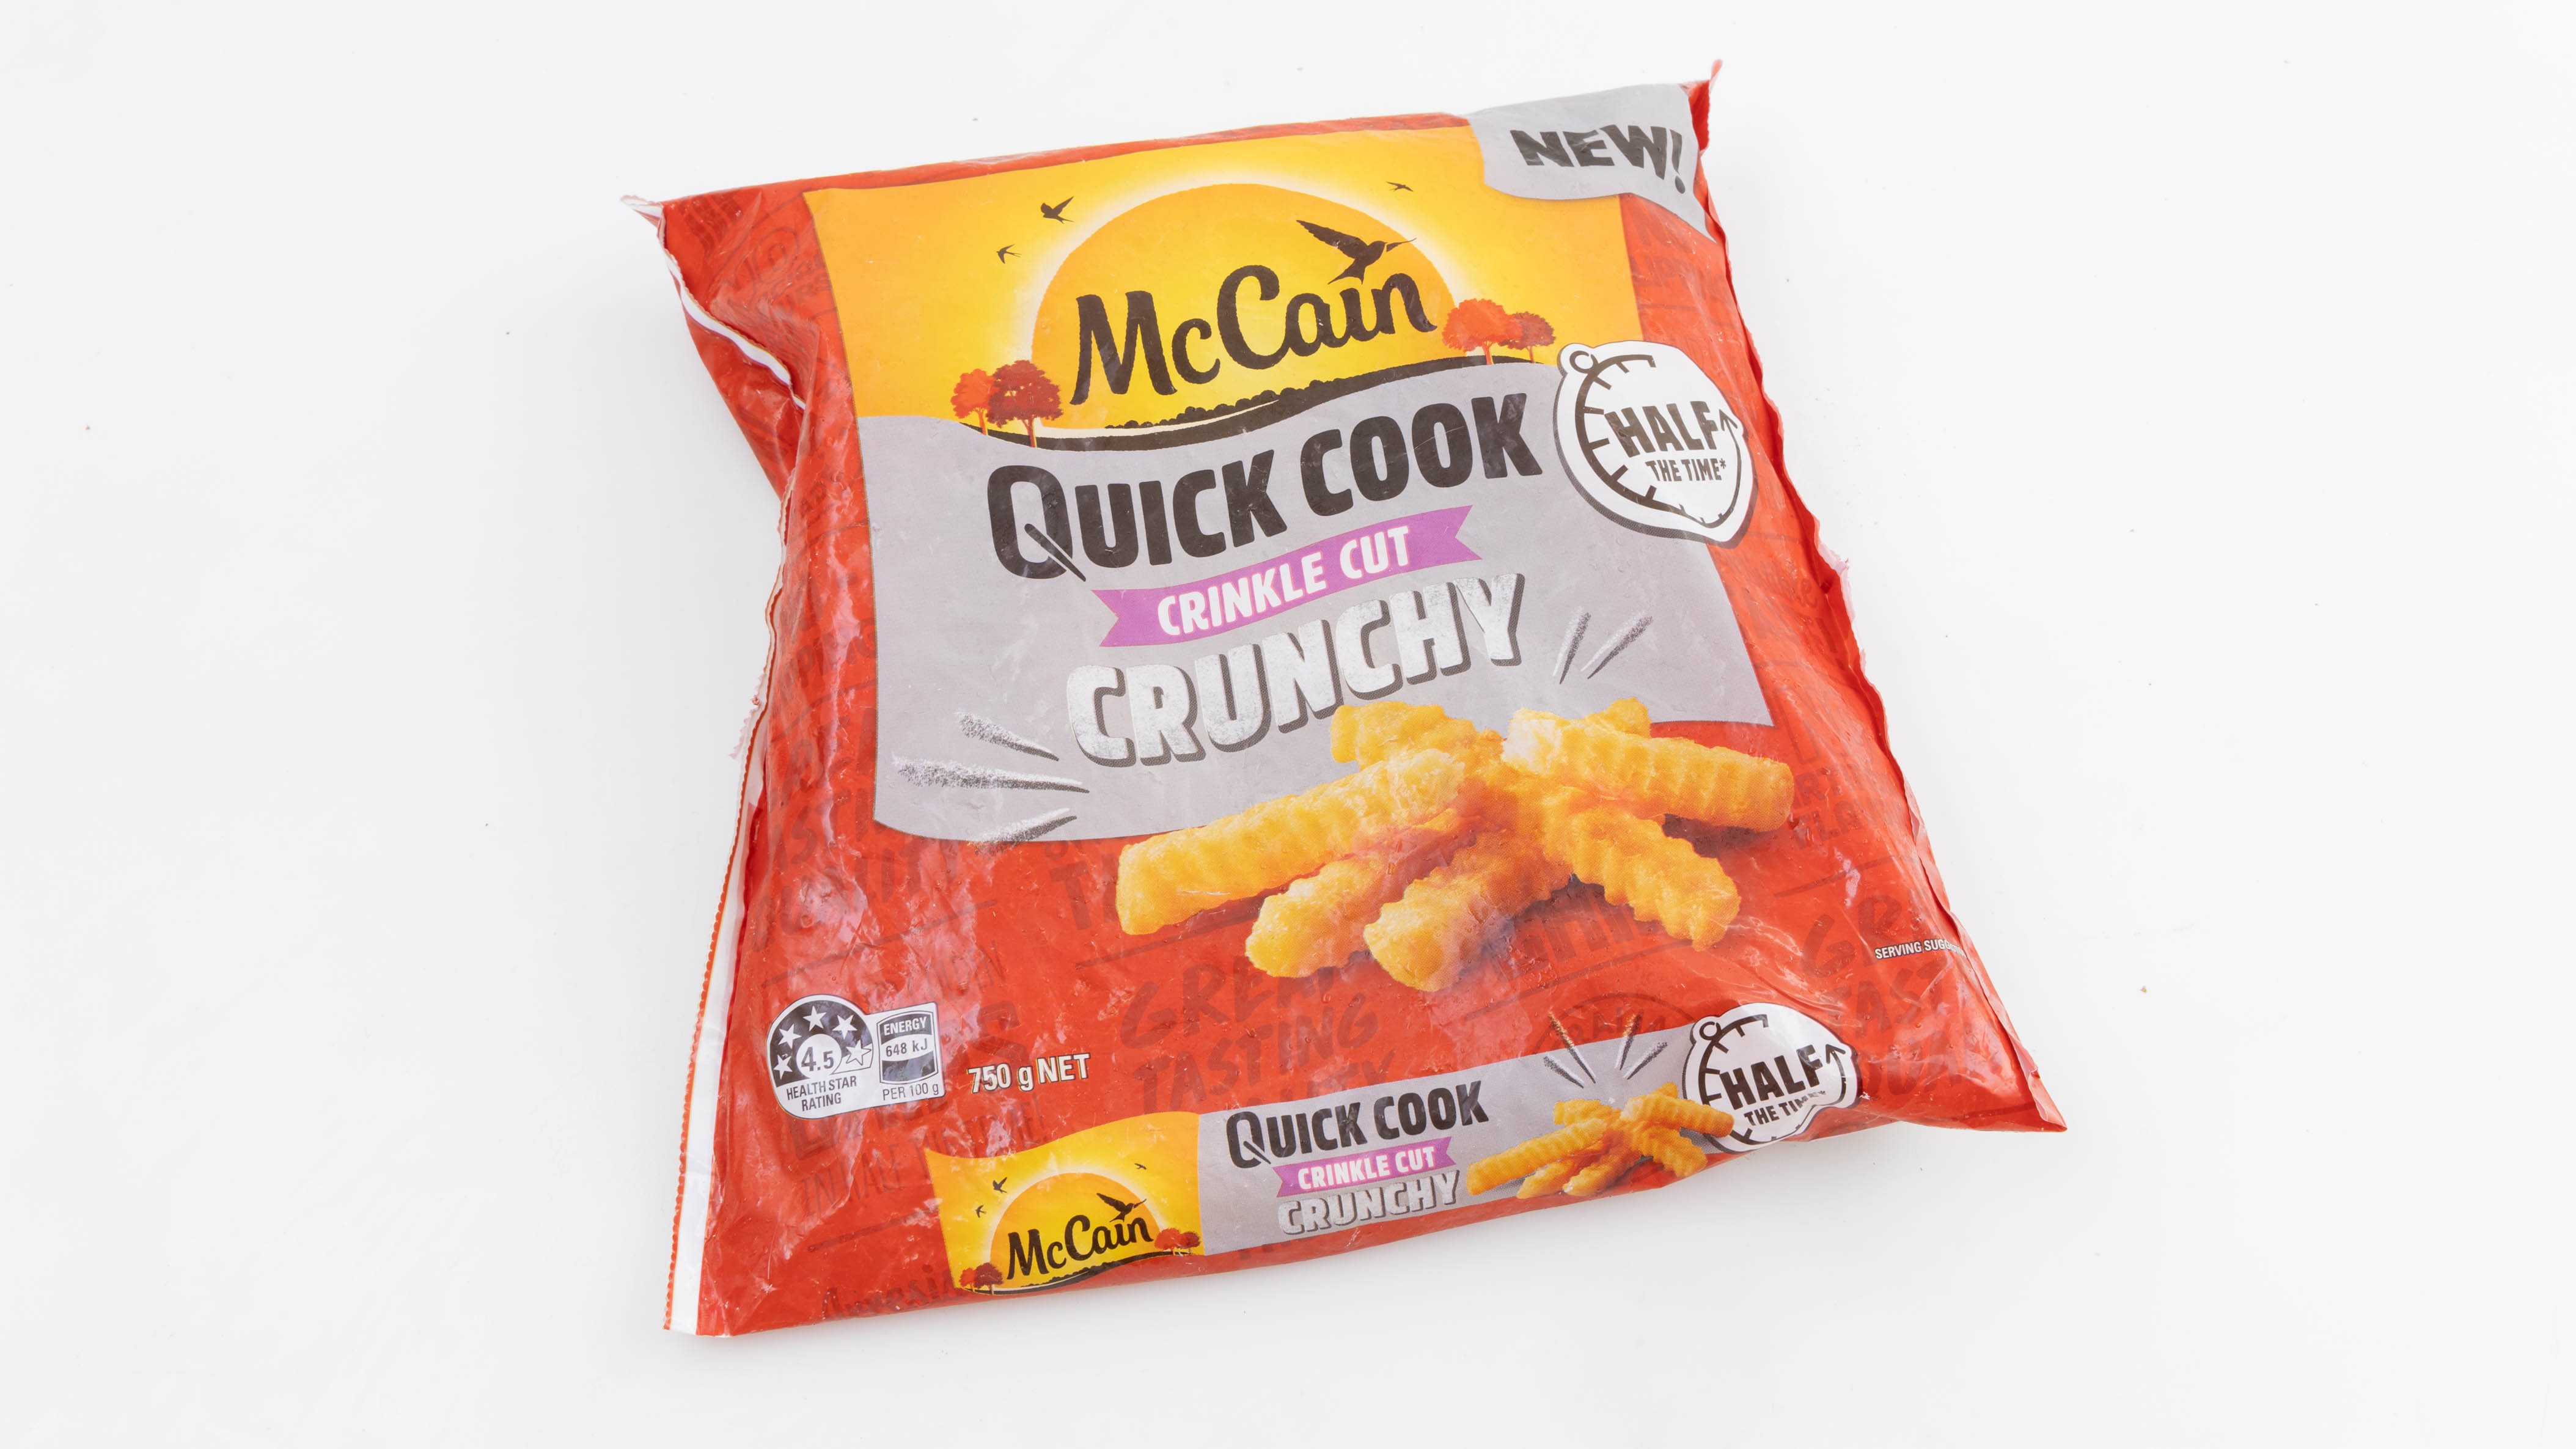 McCain Quick Cook Crinkle Cut Crunchy Chips carousel image